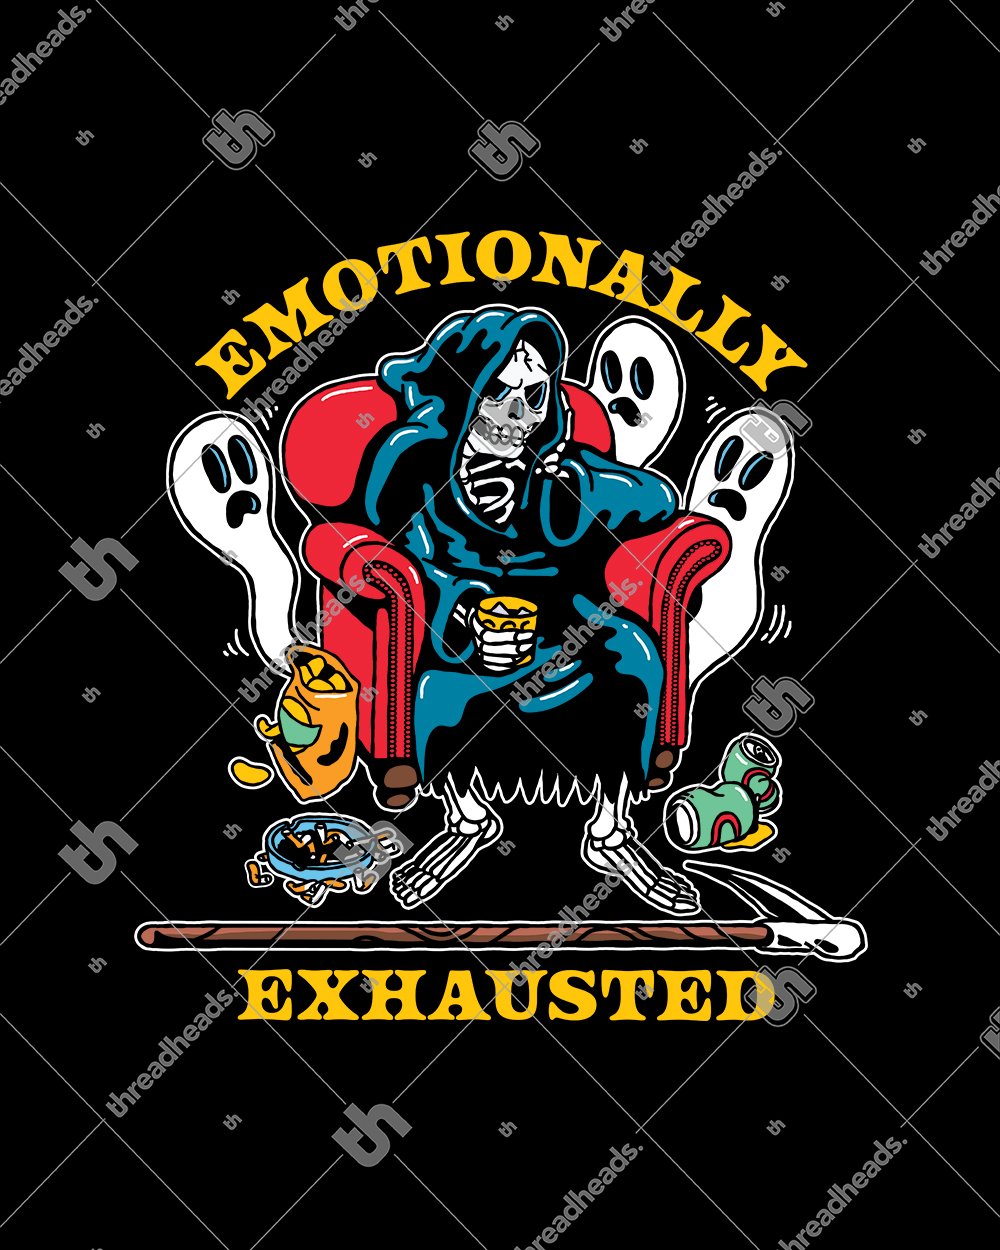 Emotionally Exhausted Sweater Europe Online #colour_black